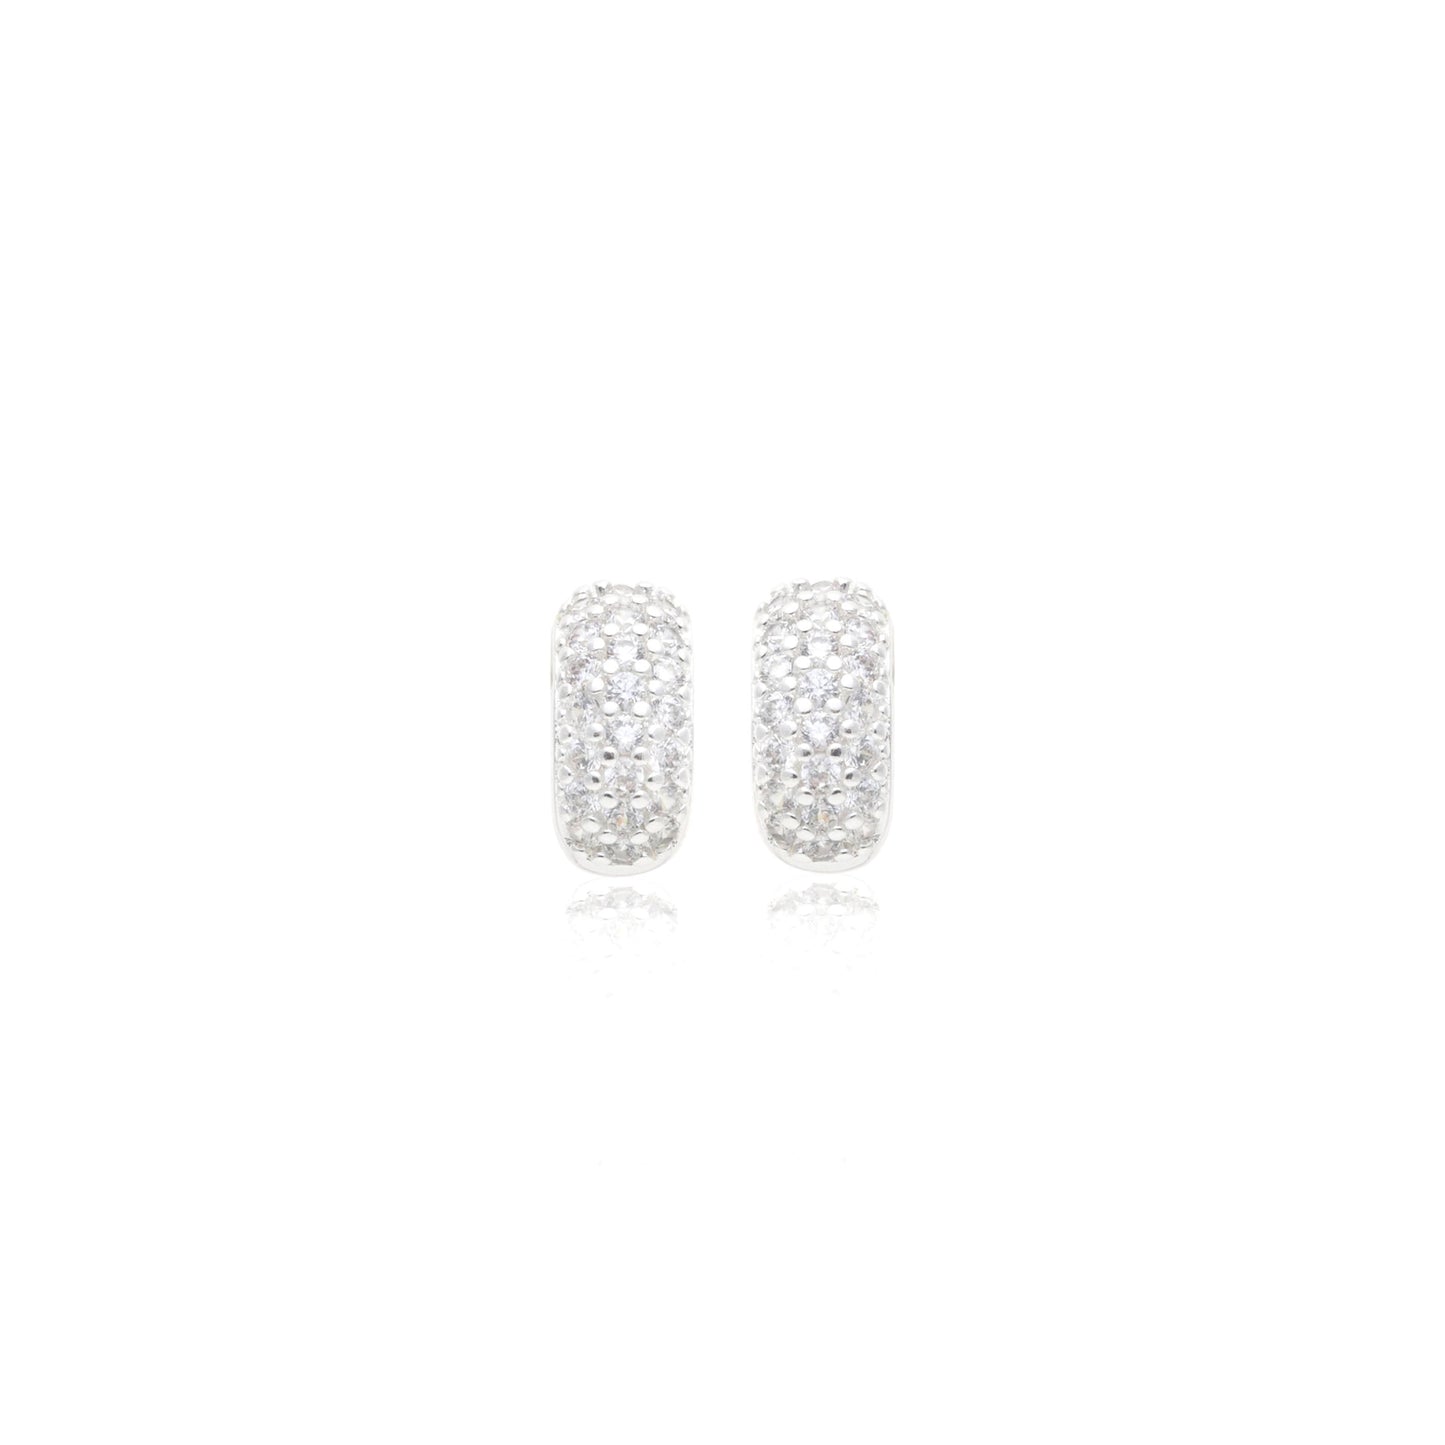 Hoop earring with white cubic zirconia